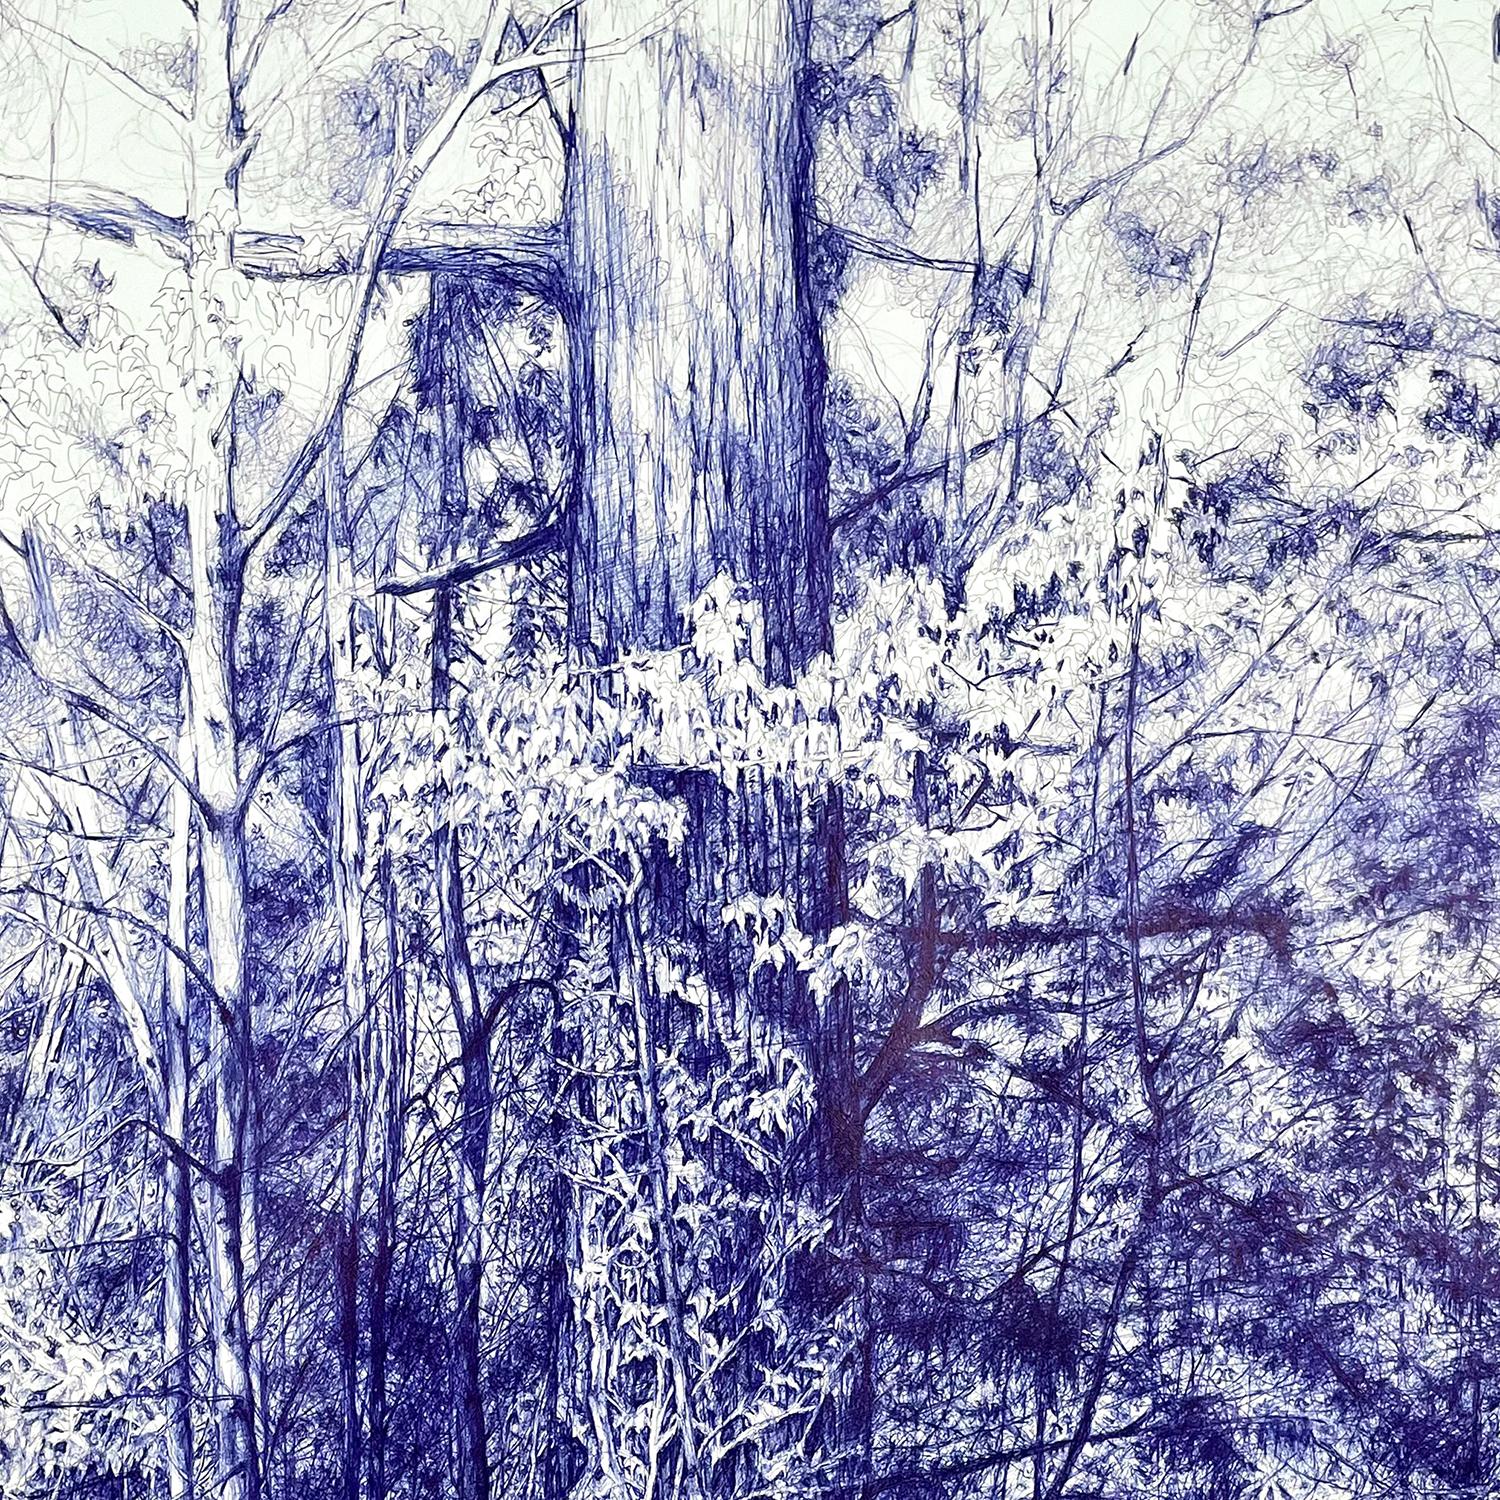 Oracle of Bastet (Blue Ballpoint Pen Drawing of Forested Landscape with Trees) For Sale 1